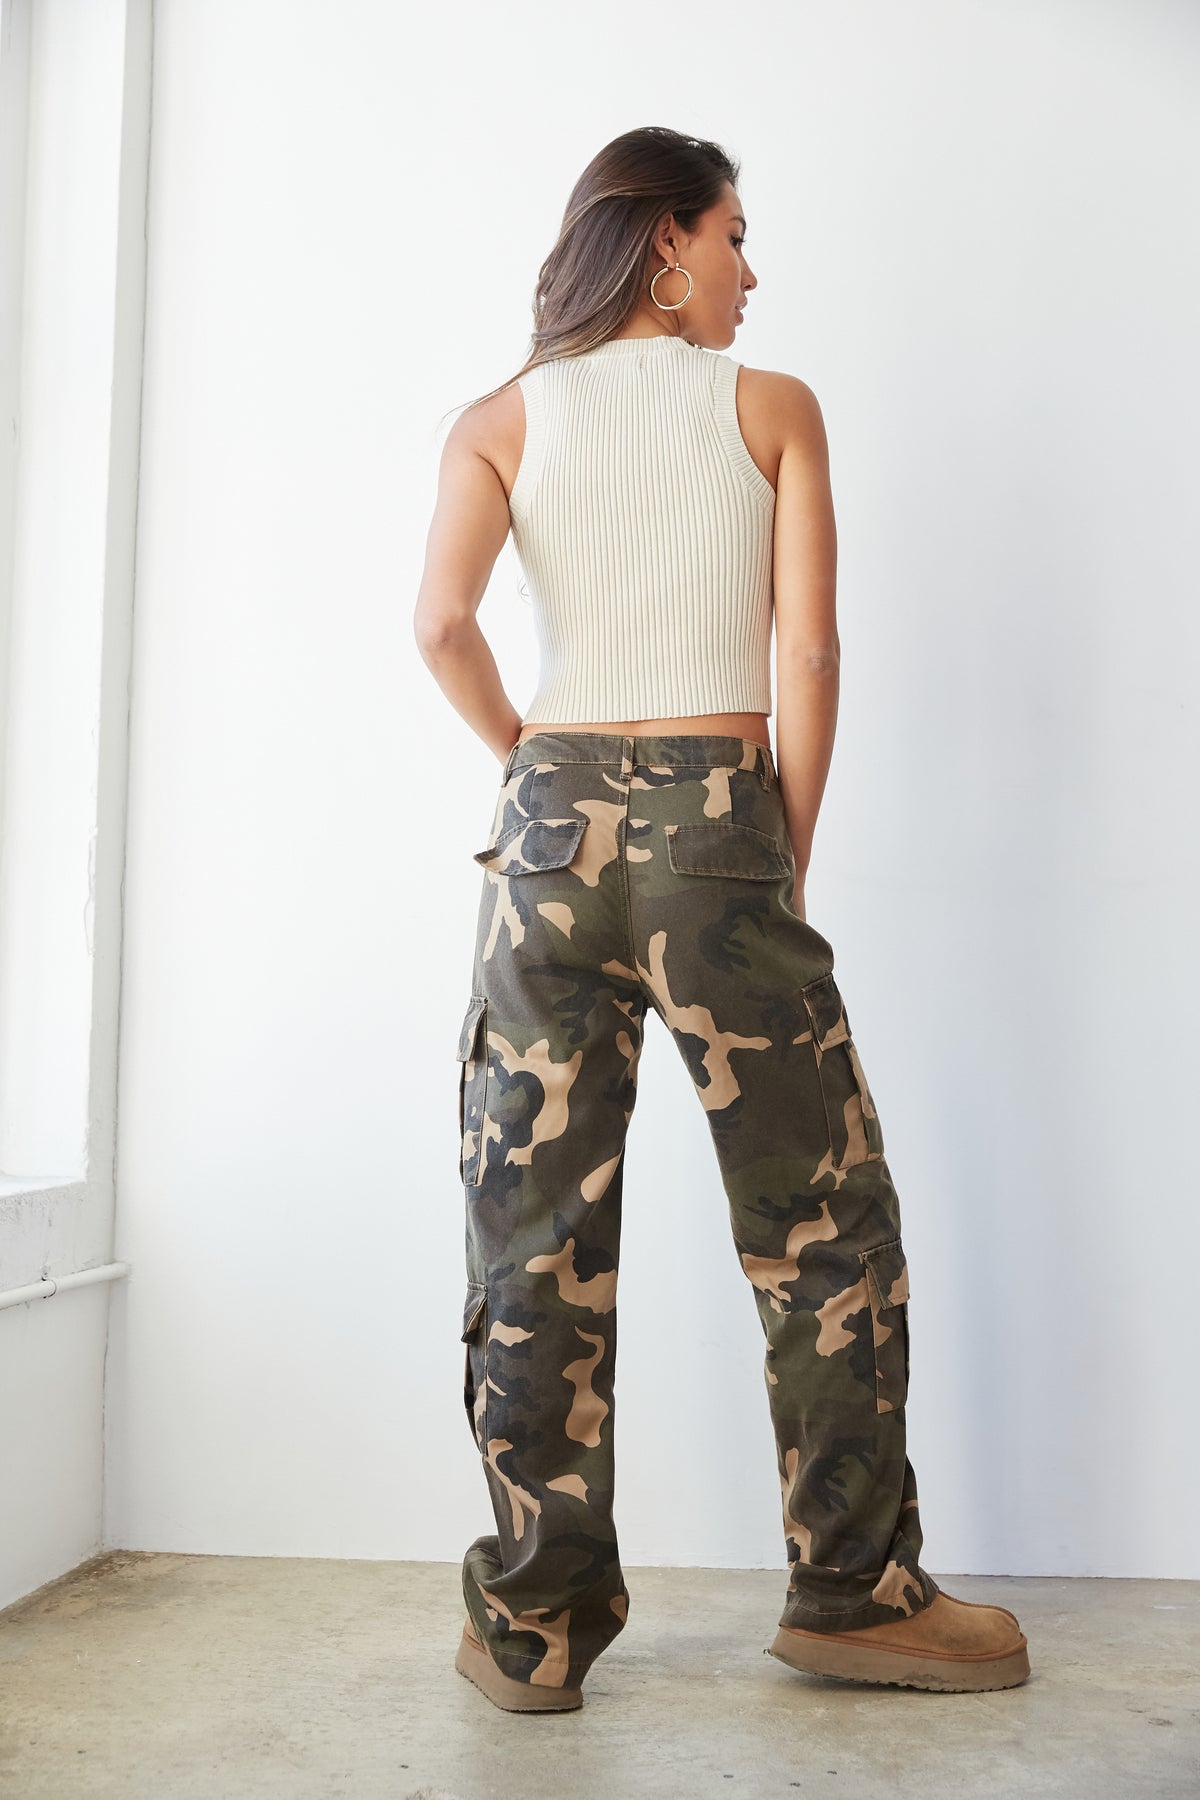 army green camouflage pants - cargo pants with camo prints - loose cargo pants 